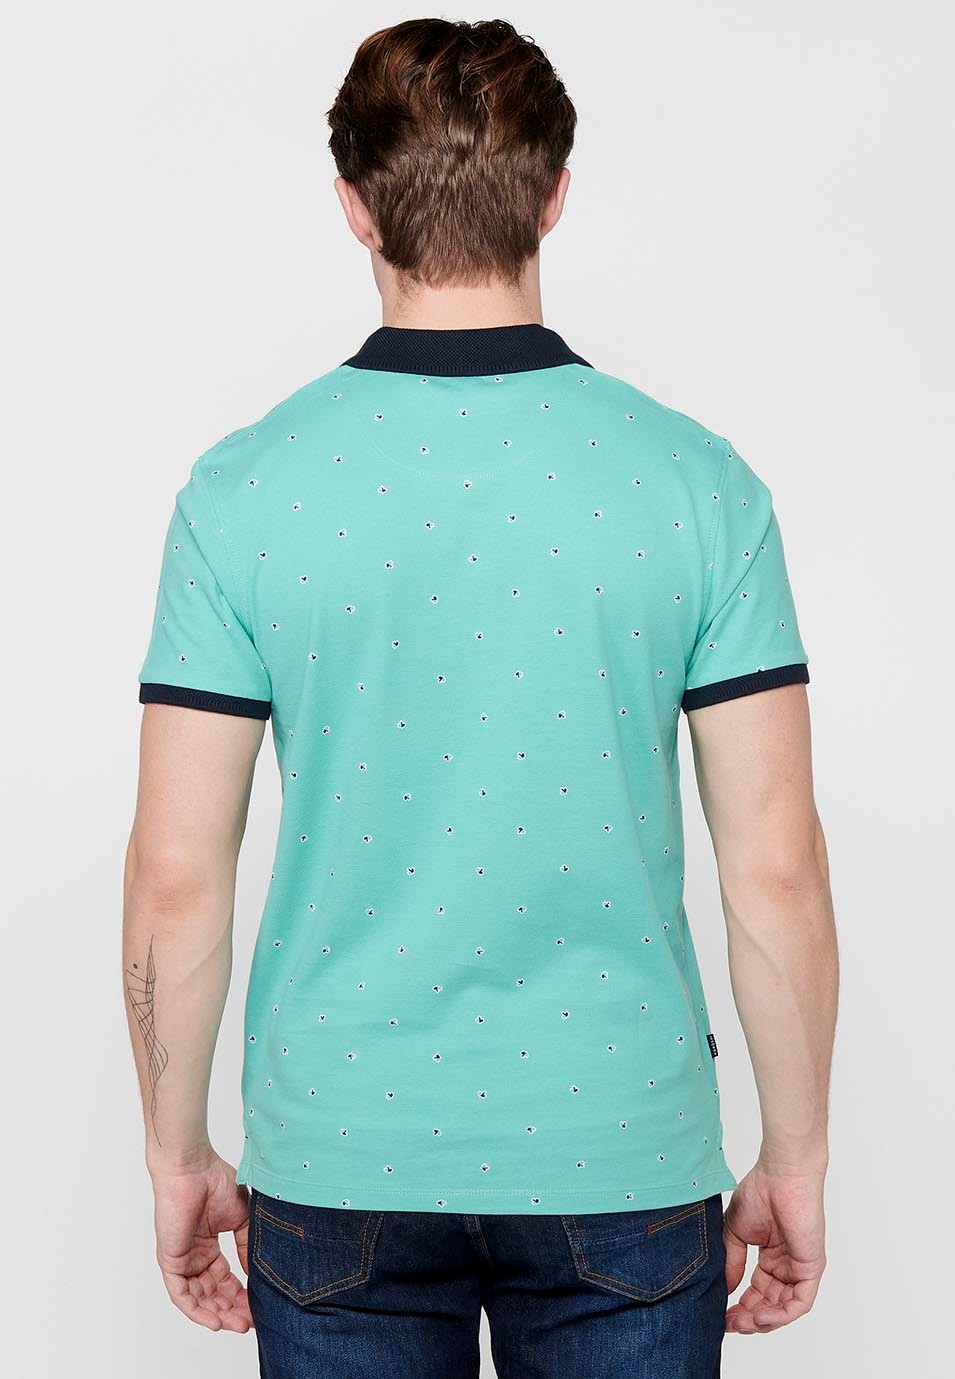 Men's mint printed cotton short-sleeved polo shirt 7